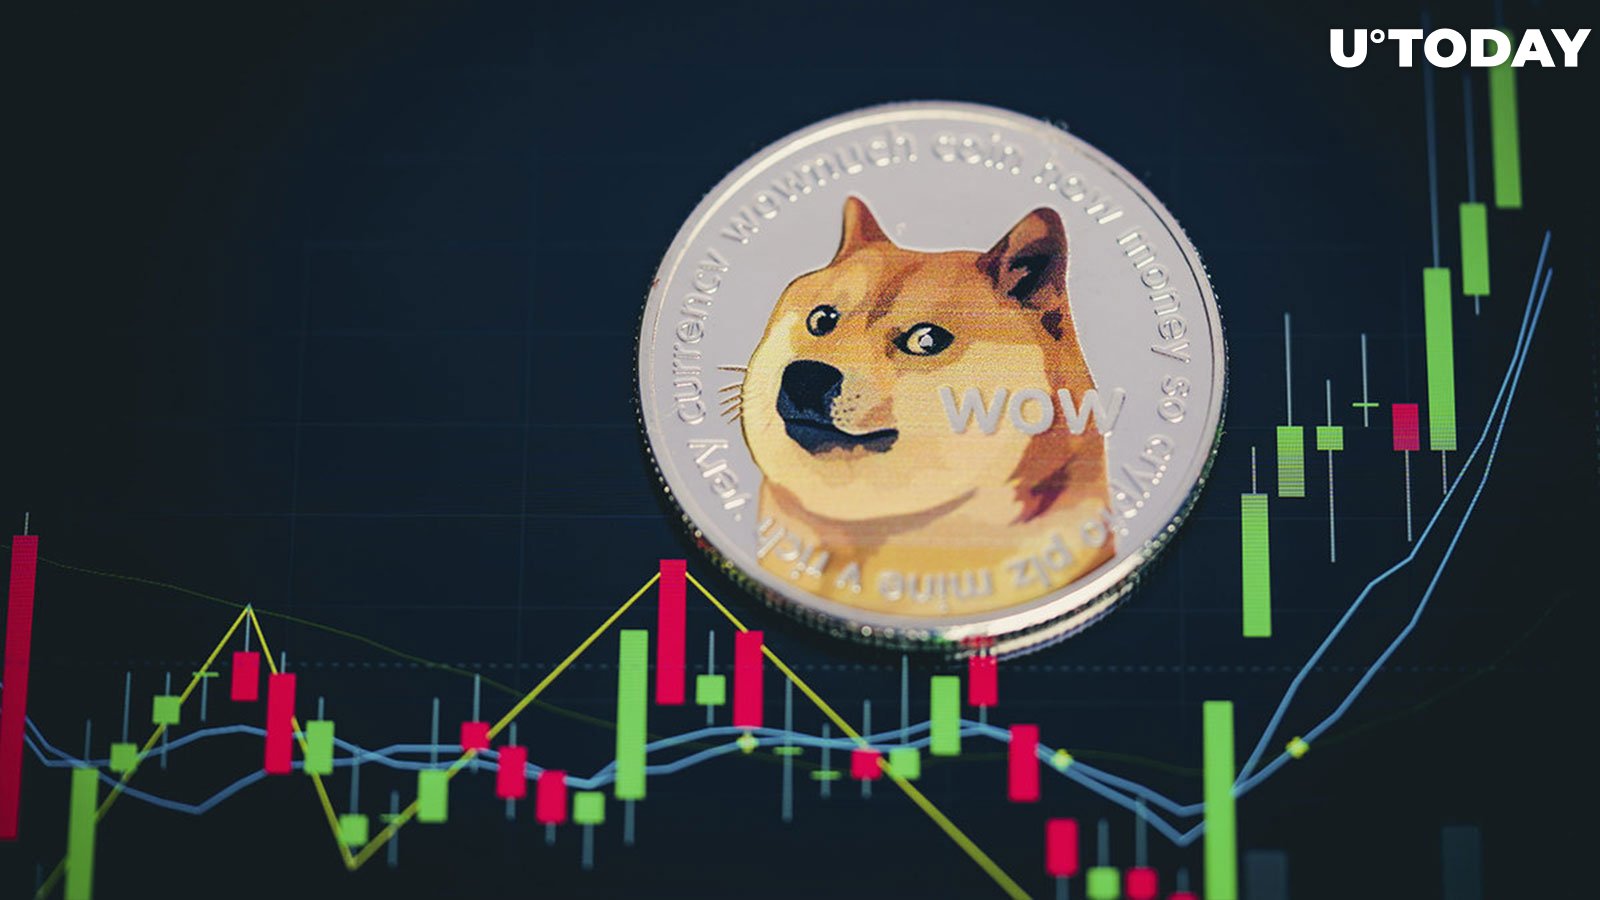 Dogecoin (DOGE) to Start Trading on This Major Exchange 